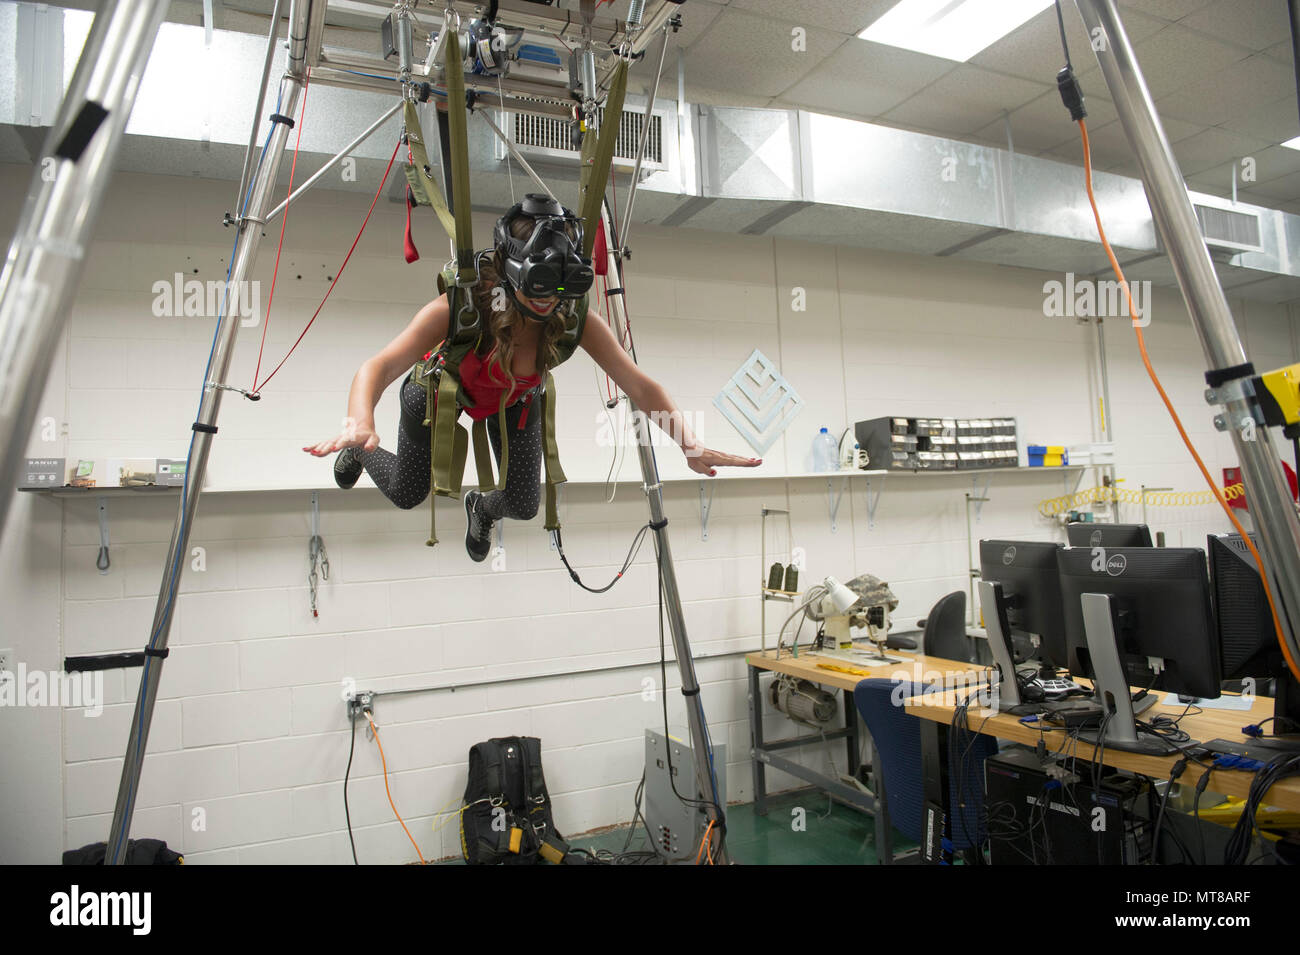 Ashley, a Tampa Bay Buccaneers cheerleader, experiences freefall in the MC-60 parachute simulator at the parachute rigging facility while visiting MacDill Air Force Base in Tampa, Fla., Nov. 7, 2017. The cheerleaders toured U.S Special Operations Command and other base facilities to meet with service members and to get a glimpse of military life. (Photo by Army Sgt. Jose Reyes) Stock Photo